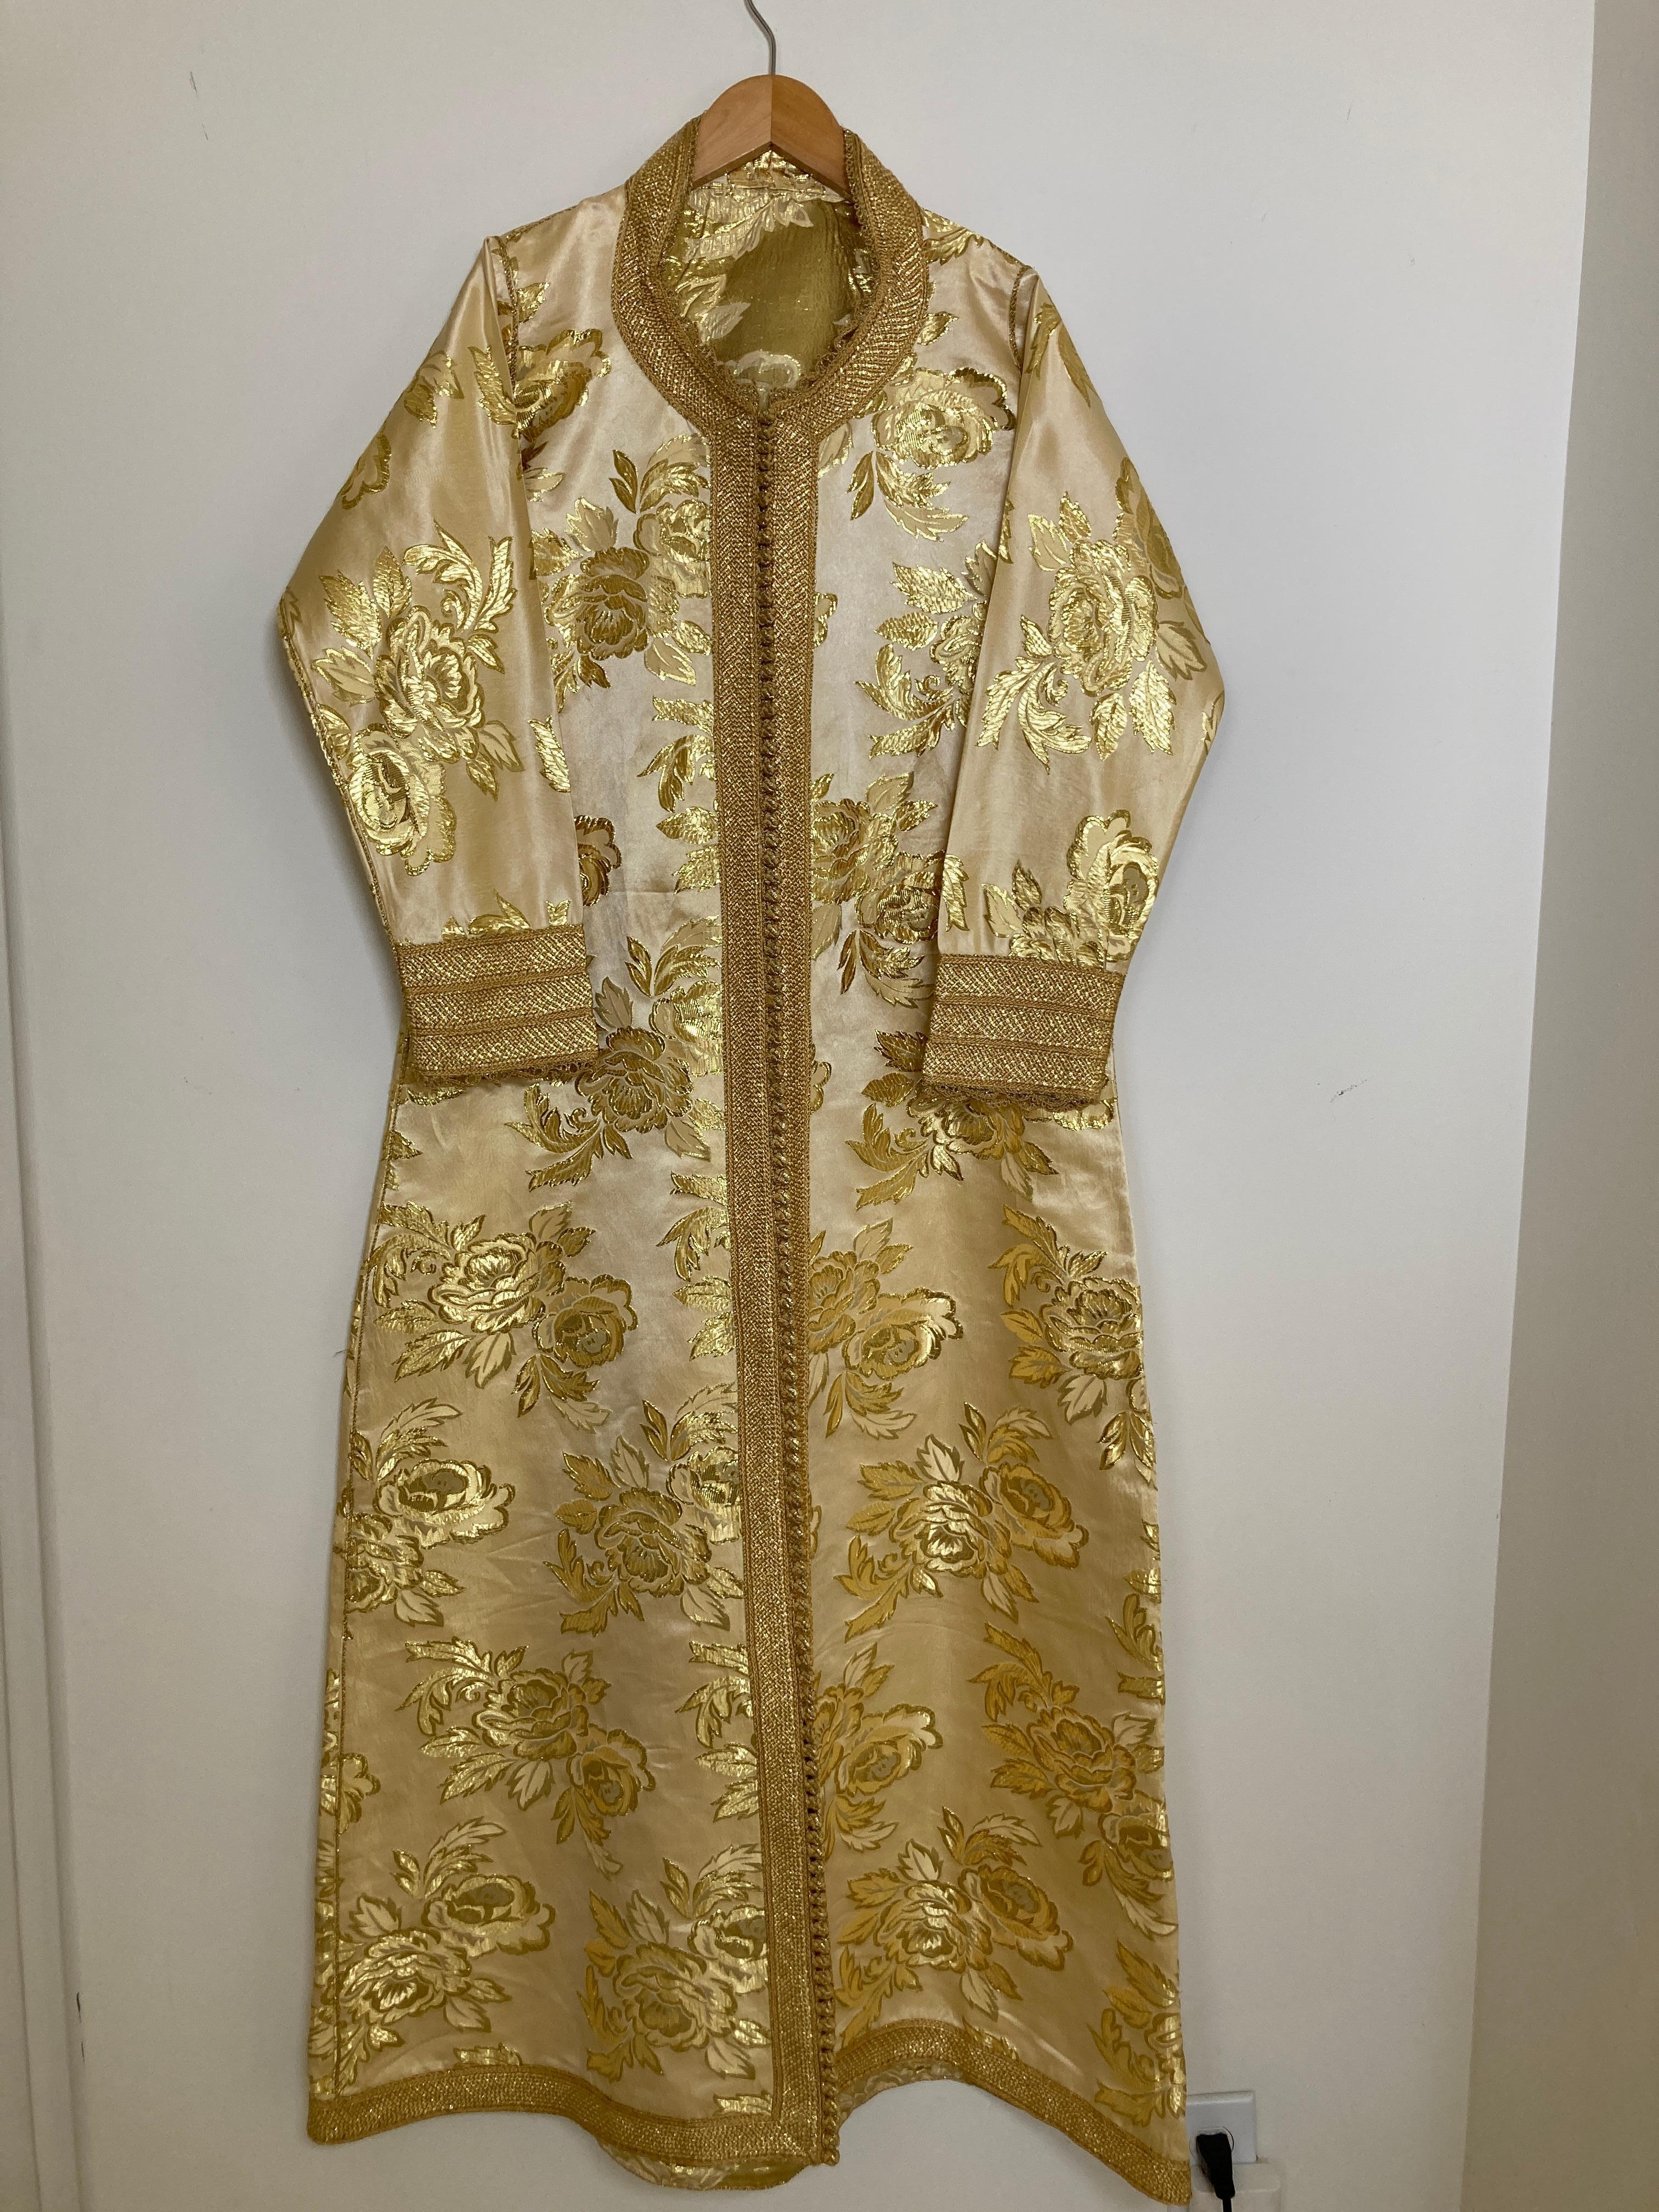 Amazing vintage Moroccan Caftan, gold silk damask gold threads trim, Circa 1960's
The light gold damask kaftan was entirely finish by hand.
One of a kind evening antique Moorish gown.
This authentic caftan has been hand-sewn from high end damask